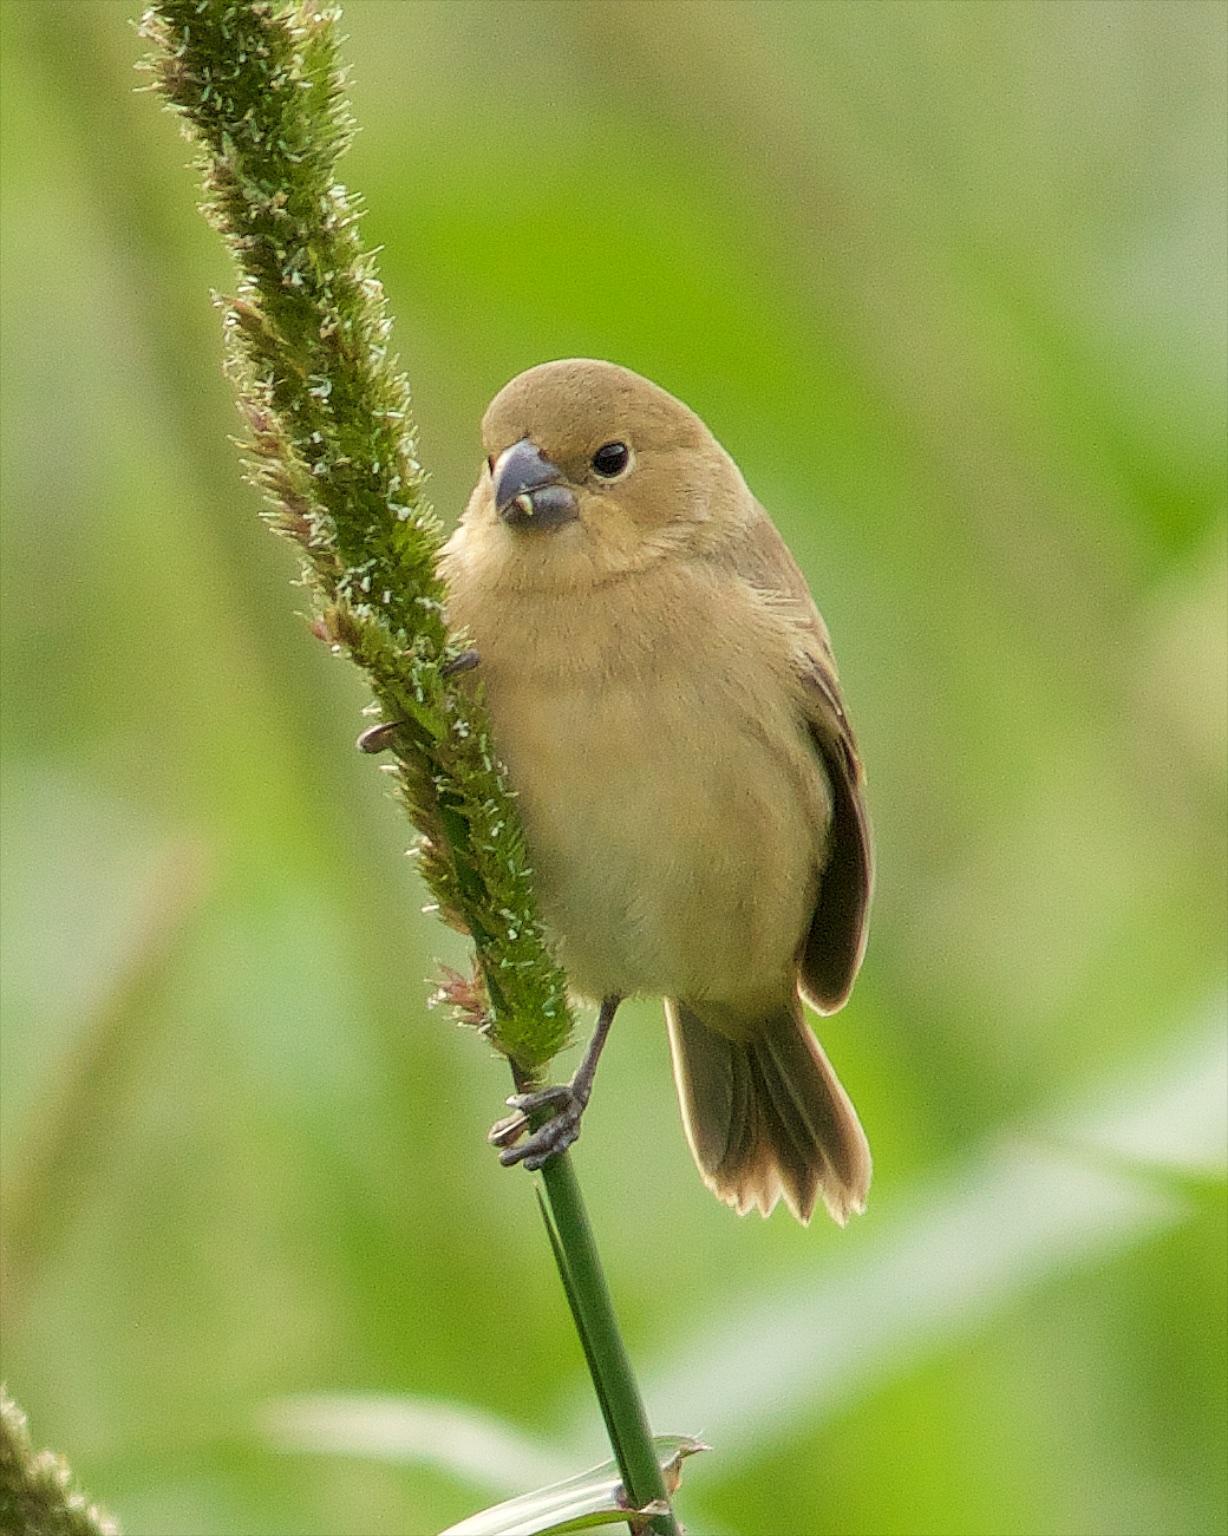 Yellow-bellied Seedeater Photo by Denis Rivard